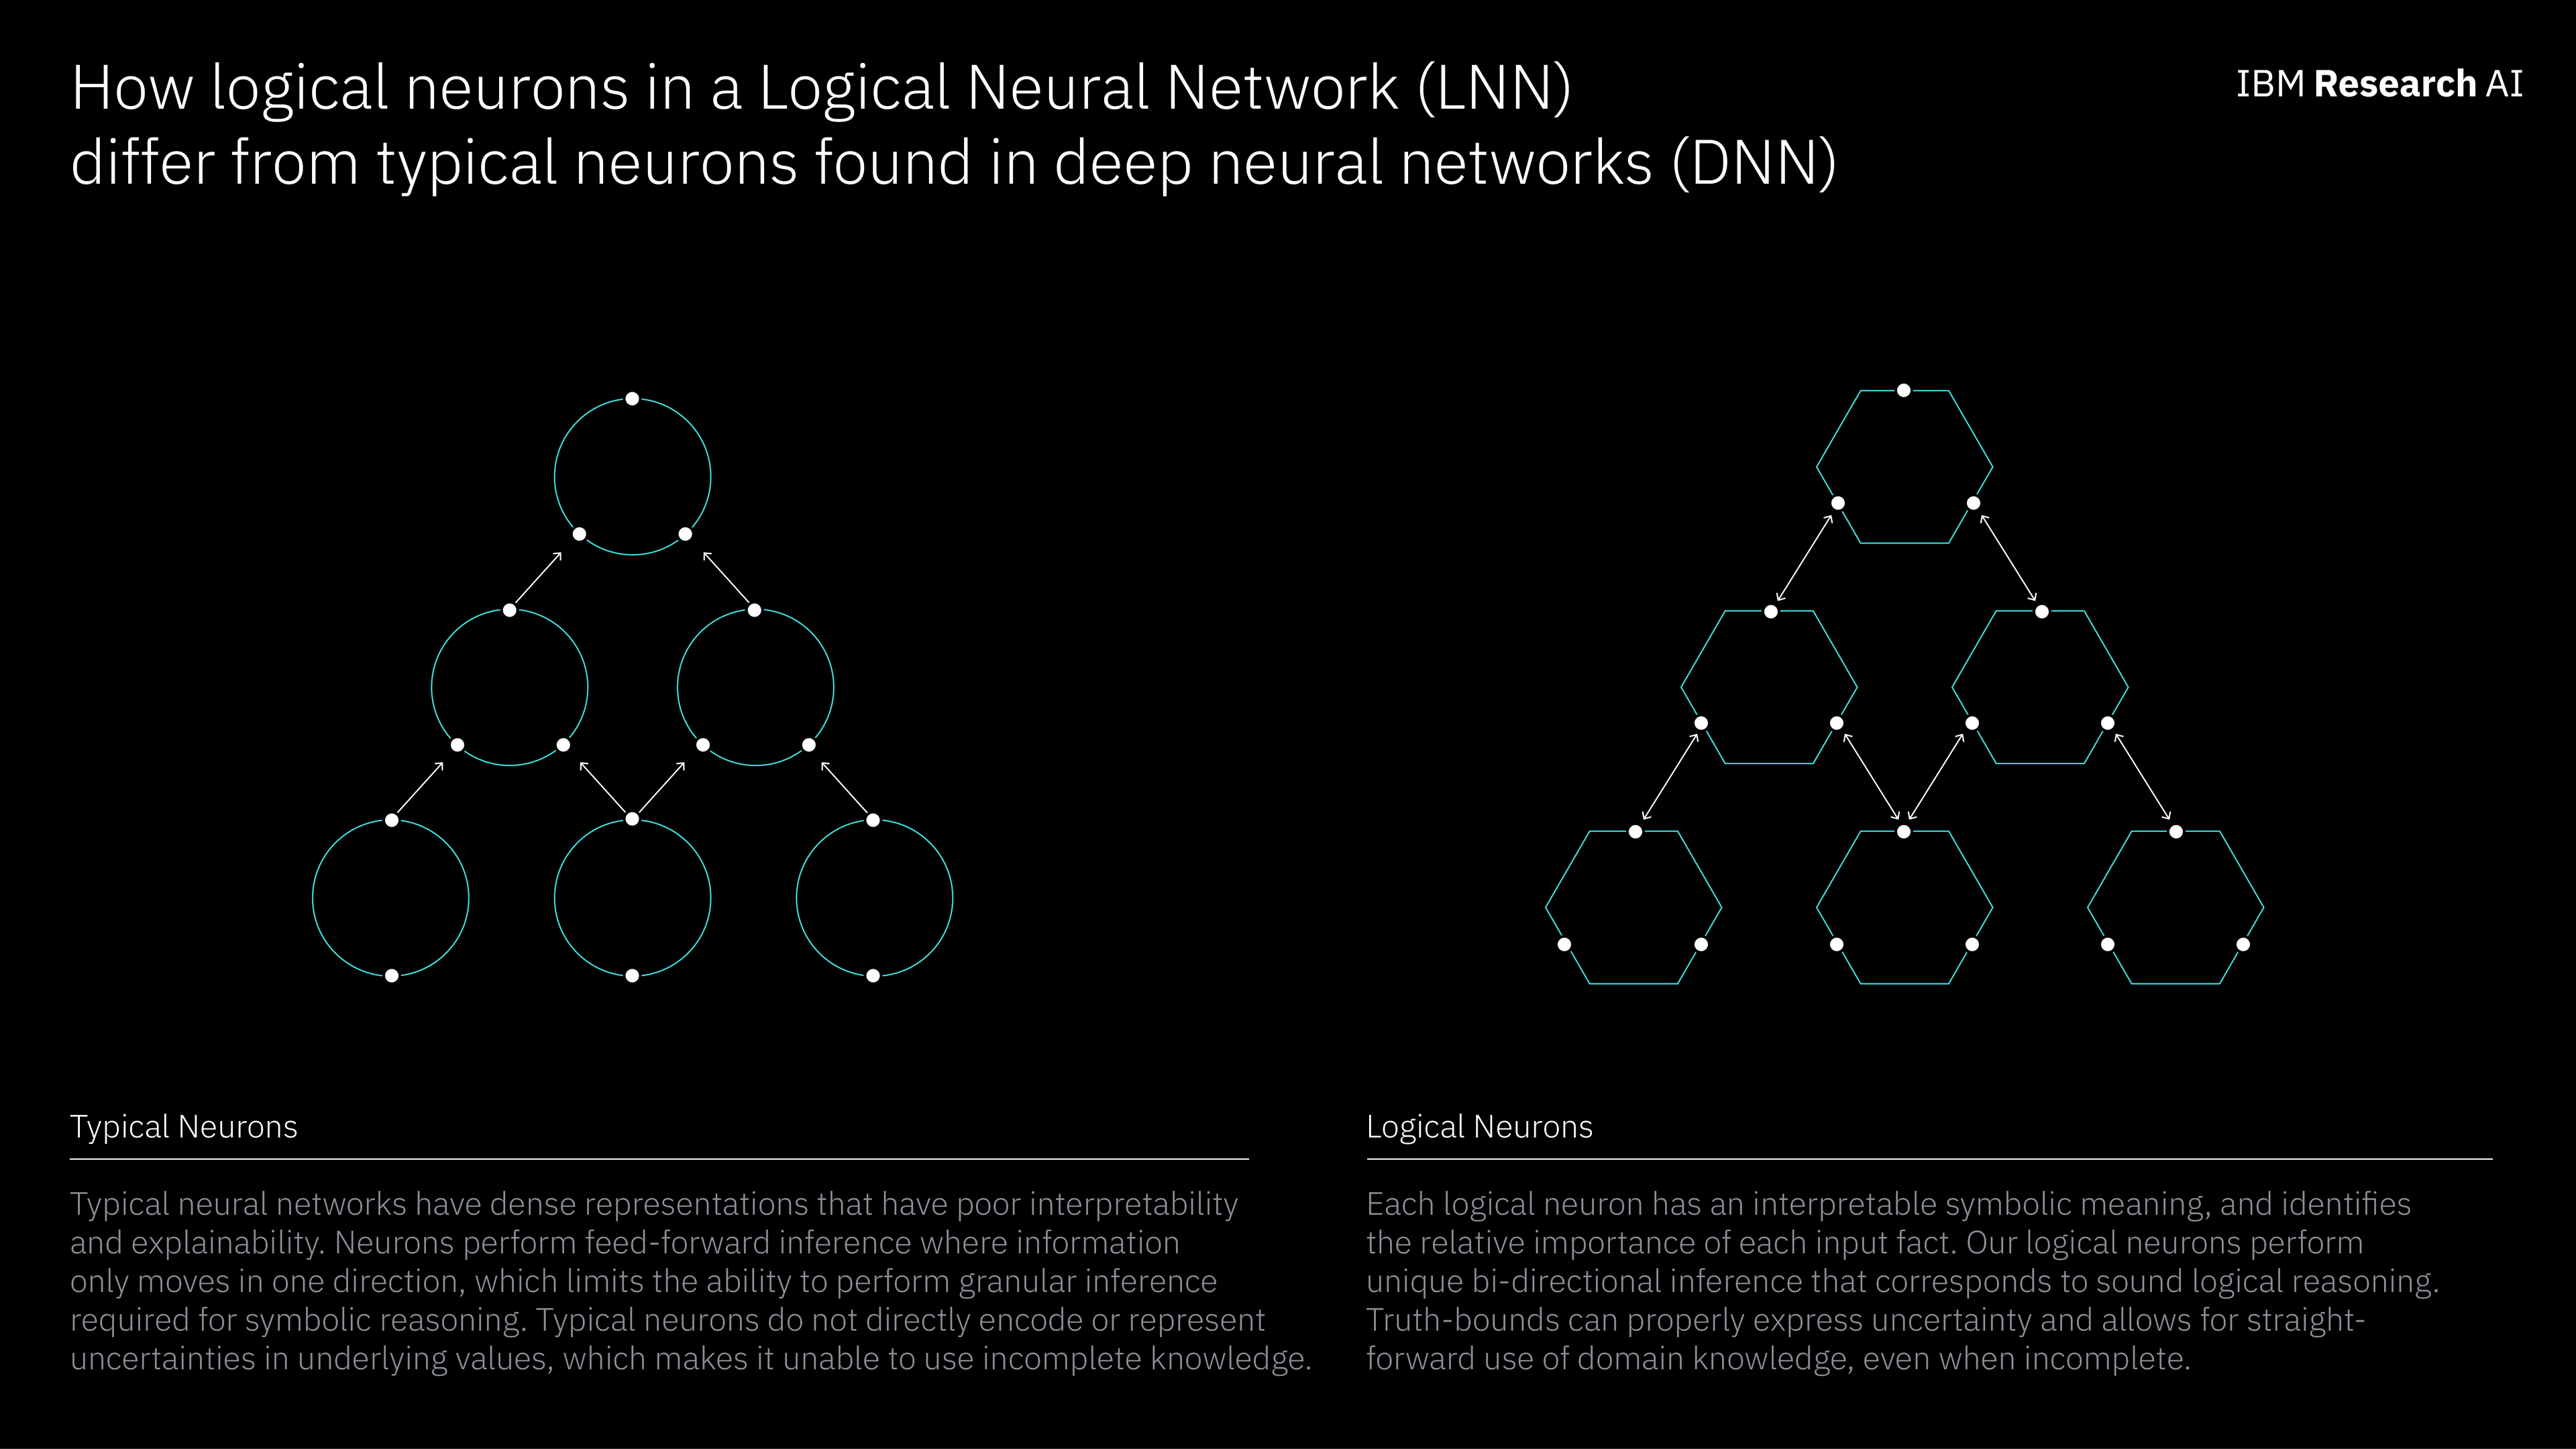 Graphic showing the difference between typical neurons and logical neurons